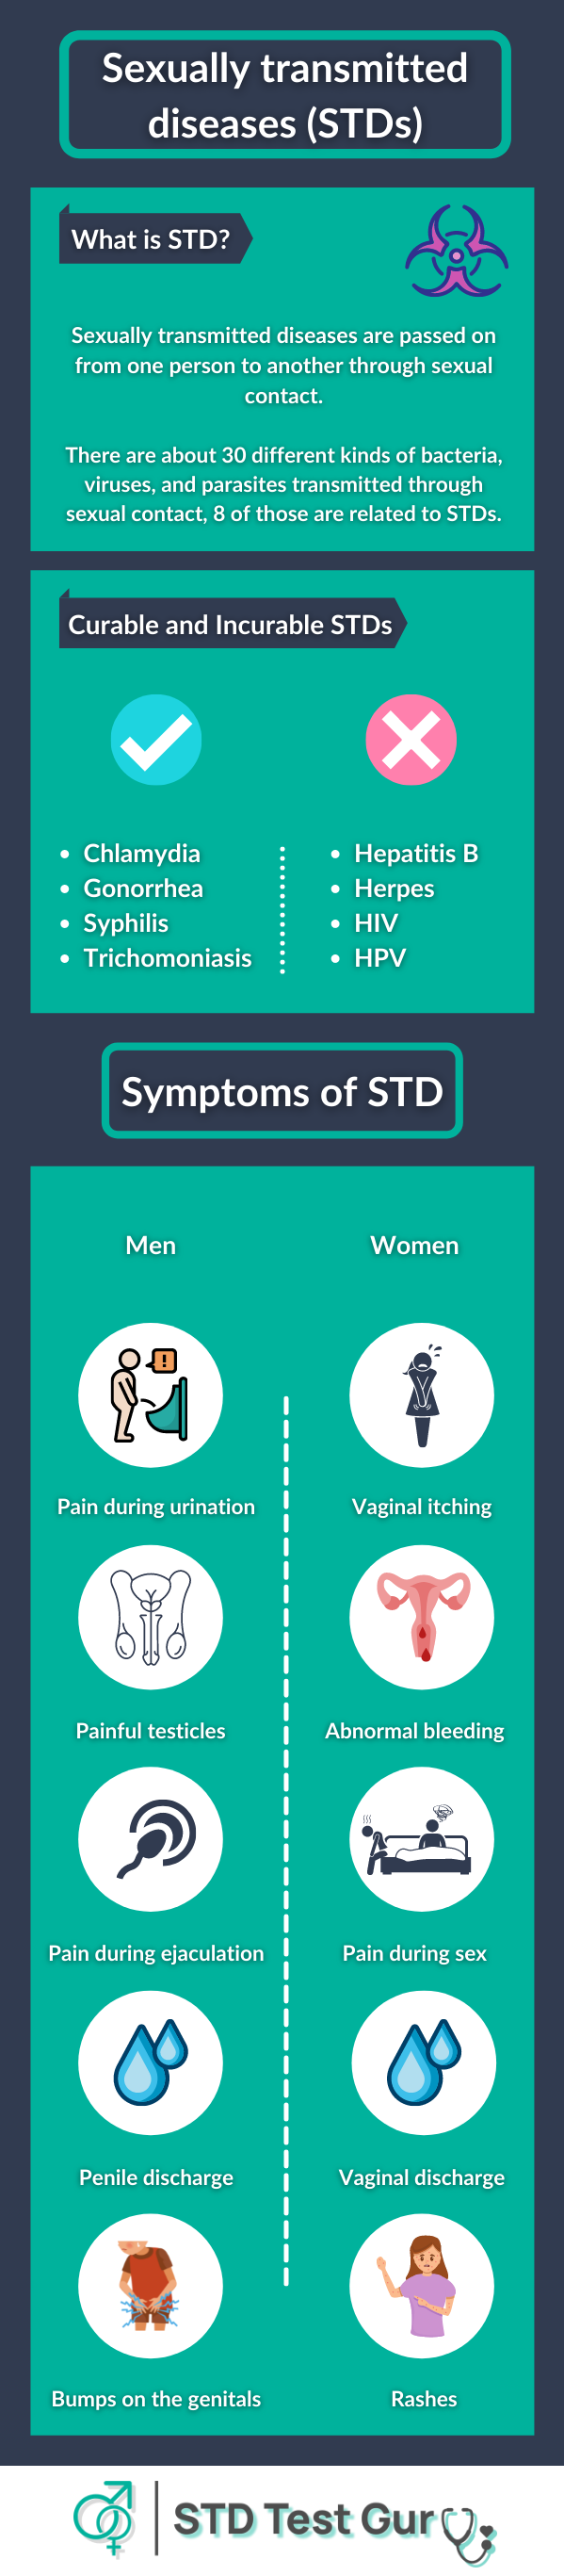 STDs that cannot be cured and STD Testing Cost in US